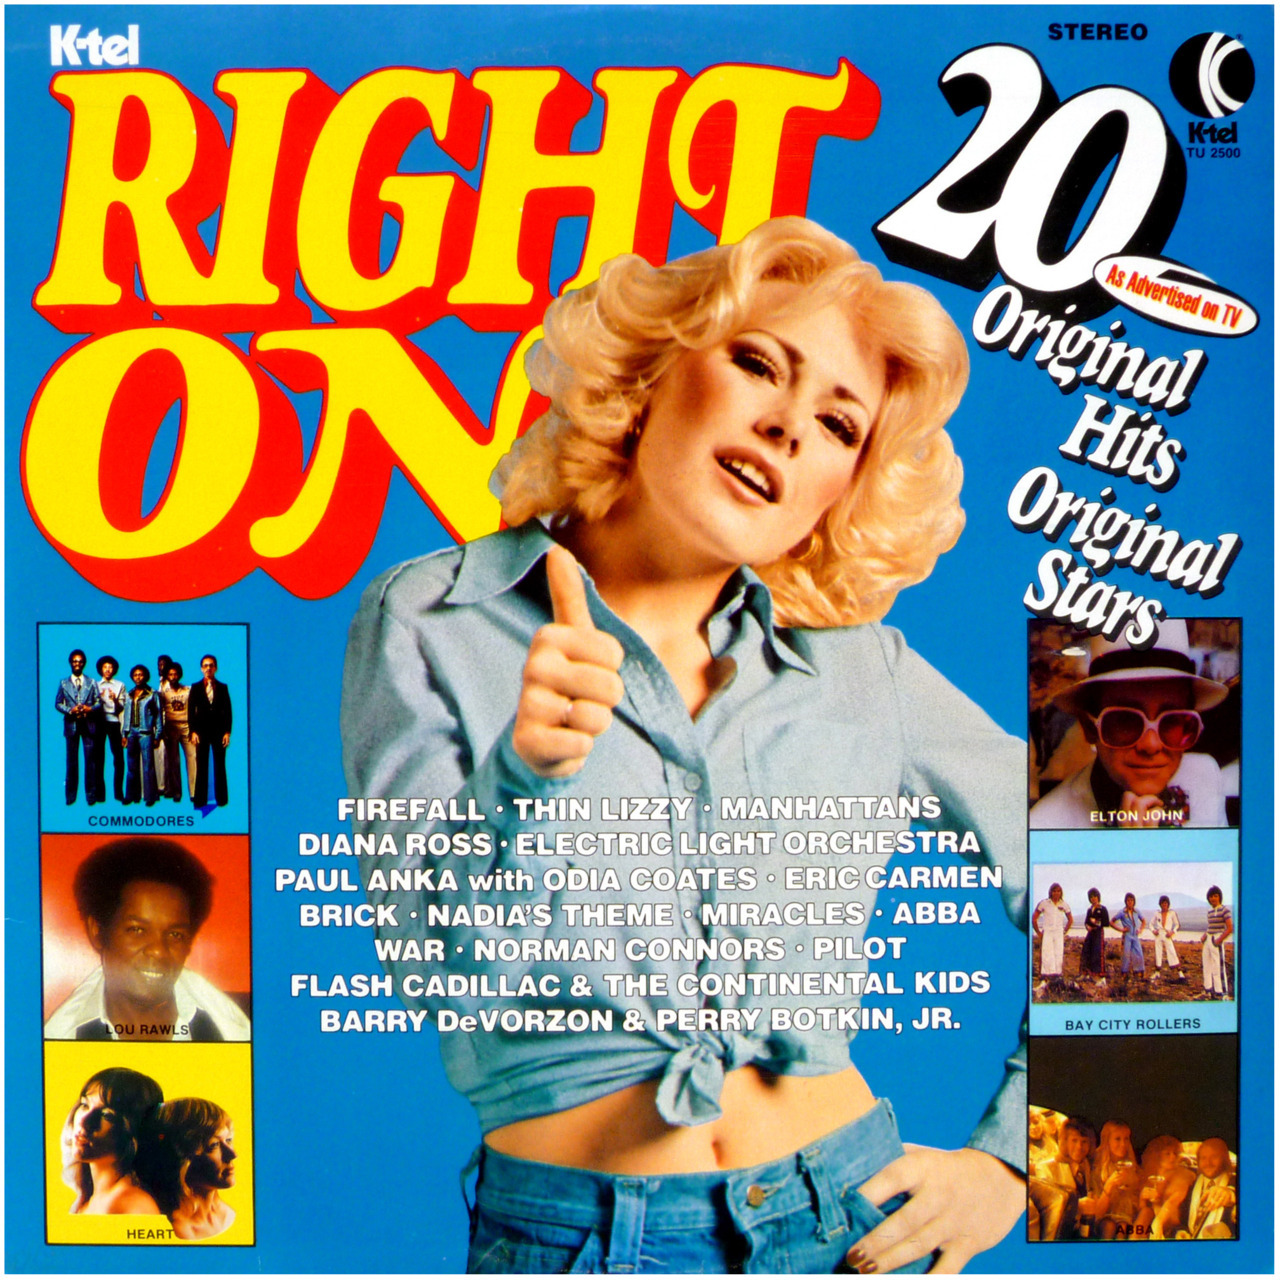 Right OnK-Tel Records/USA (1976)&amp;amp;#10;1) The Boys Are Back In Town, Thin Lizzy2) Magic Man, Heart3) You Are The Woman, Firefall&amp;nbsp;4) Strange Magic, Electric Light Orchestra5) Nadia&amp;amp;#8217;s Theme (The Young And The Restless), Barry DeVorzon &amp;amp;amp; Perry Botkin Jr.&amp;nbsp;6) Kiss And Say Goodbye, The Manhattans7) Saturday Night, Bay City Rollers (1975)8) Love Machine (Pt.1 ), The Miracles9) Love Hangover, Diana Ross10) You&amp;amp;#8217;ll Never Find Another Love Like Mine, Lou RawlsSIDE TWO11) Daniel, Elton John12) Just To Be Close To You, The Commodores13) One Man Woman, One Woman Man, Paul Anka With Odia Coates14) I Do, I Do, I Do, I Do, I Do, Abba15) You Are My Starship, Norman Conners16 ) The Cisco Kid, War17) All By Myself, Eric Carmen18) Magic, Pilot&amp;nbsp;19) Did You Boogie (With Your Baby), Flash Cadillac &amp;amp;amp; The Continental Kids20) Dazz, Brick&amp;nbsp;